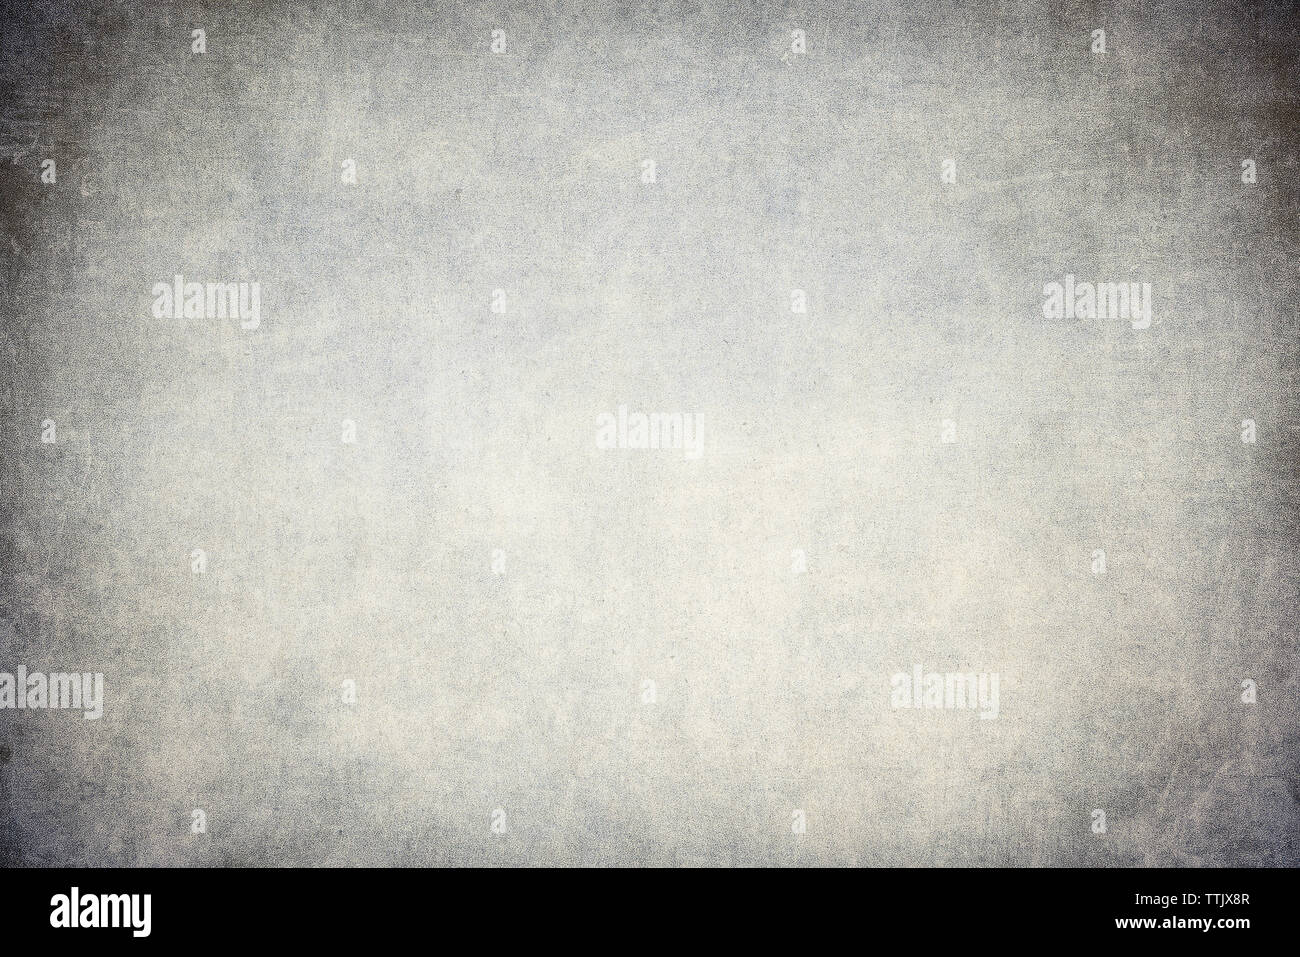 grunge background with space for text or image Stock Photo